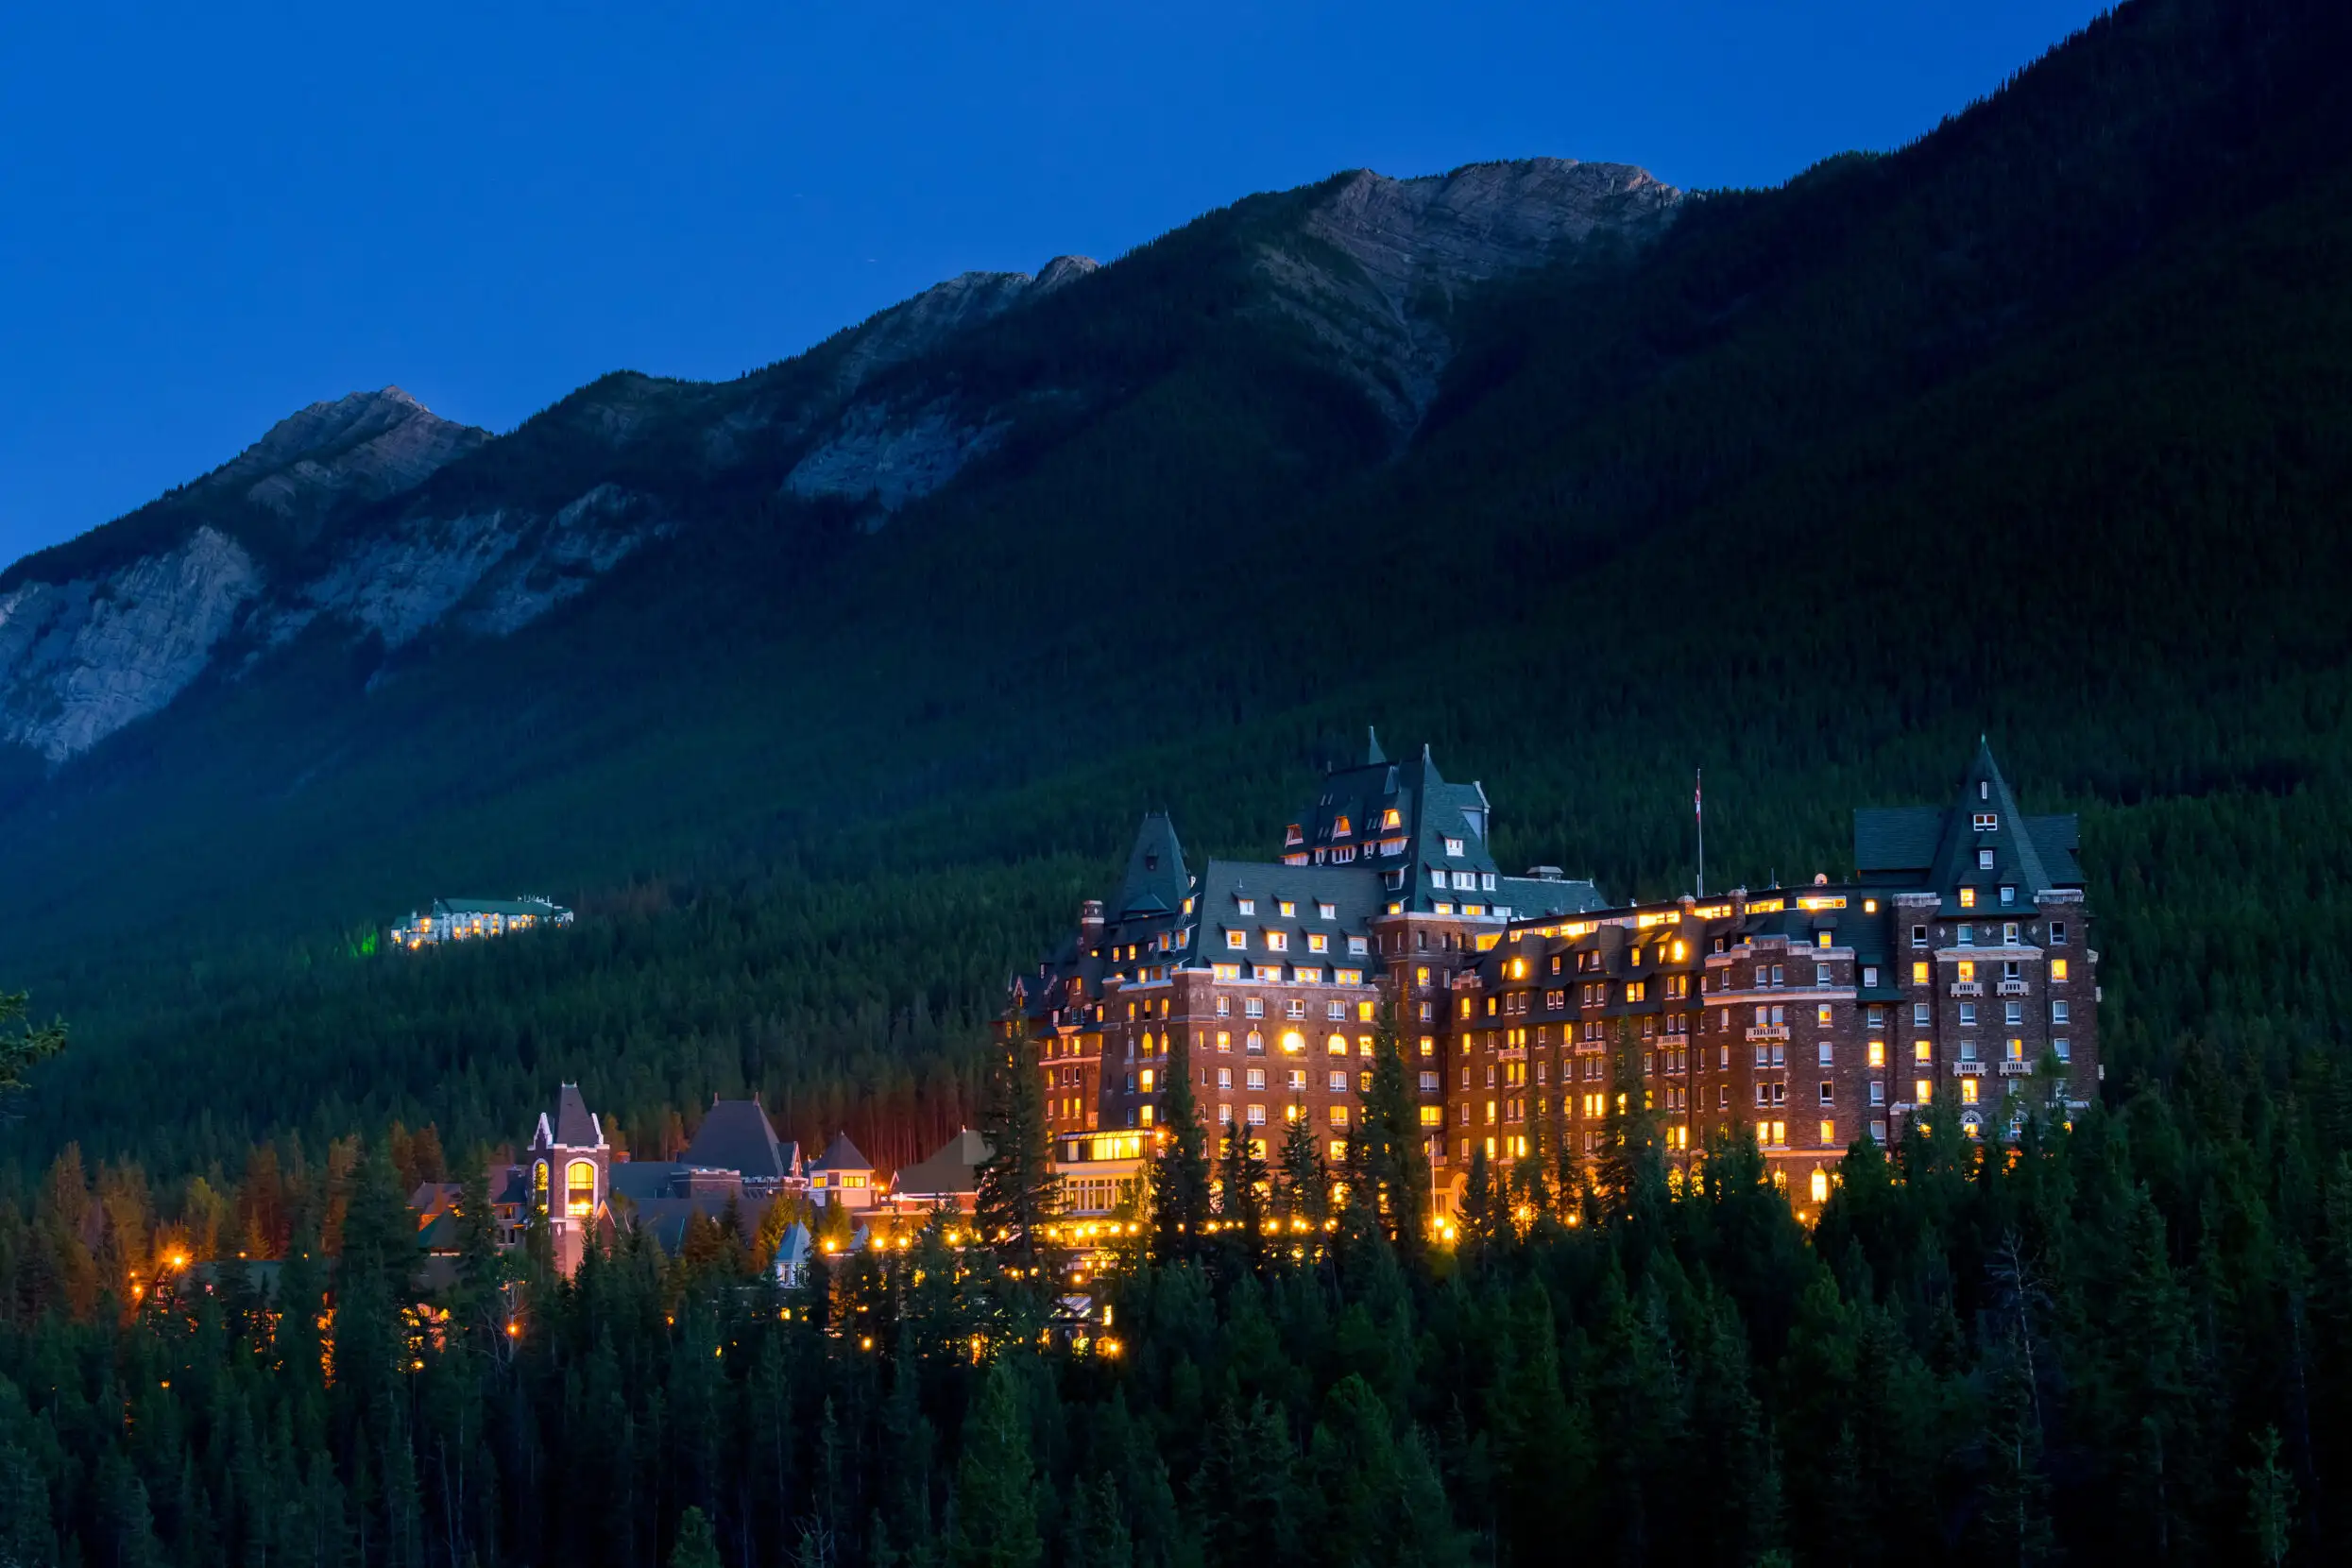 Fairmont Banff Springs castle in the wilderness at a distance, illuminated at by window lights at night